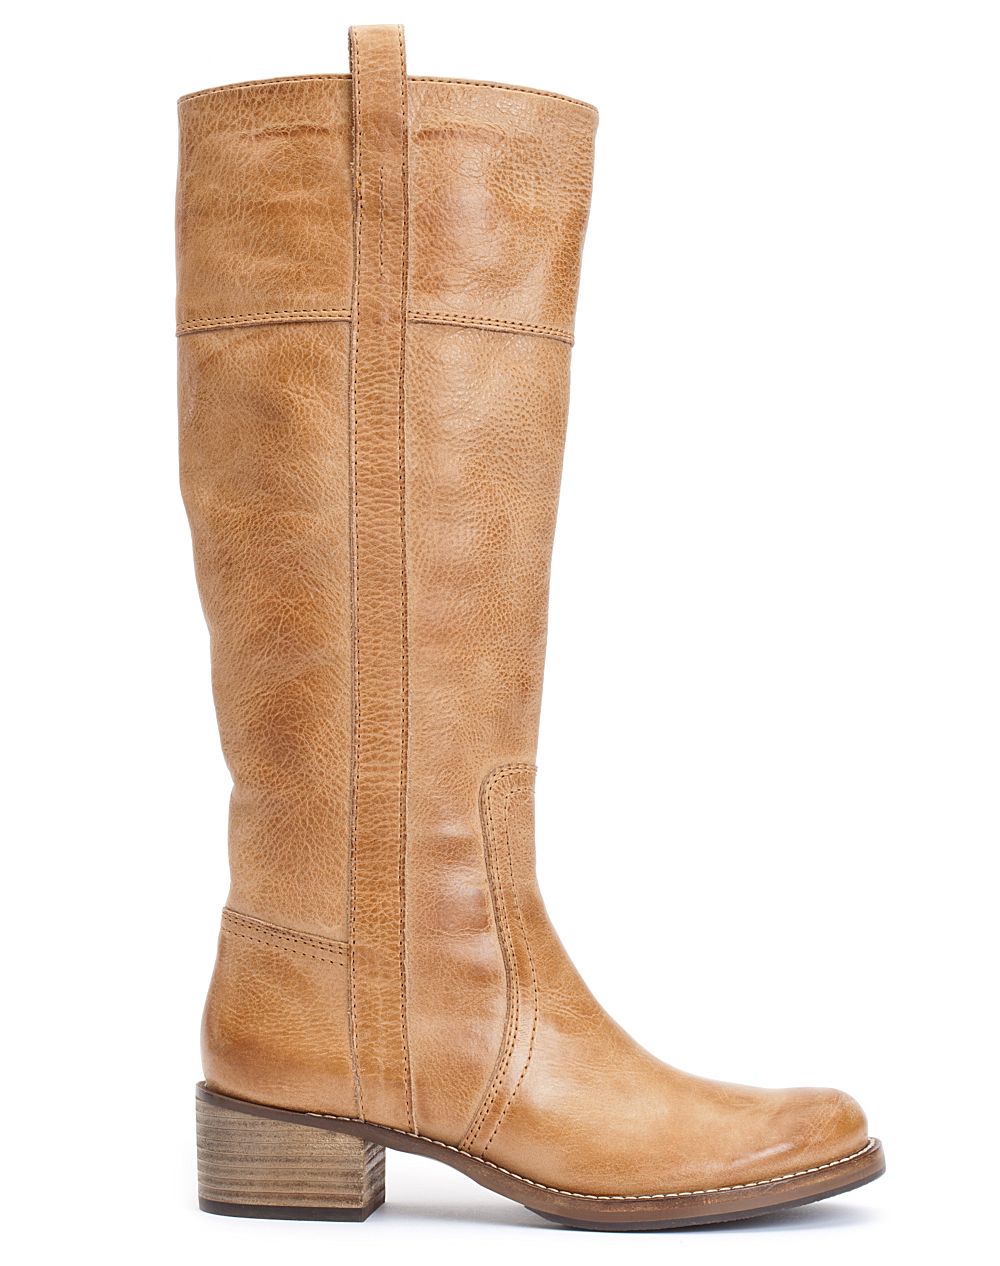 Lyst - Lucky brand Hibiscus Tall Boots in Brown